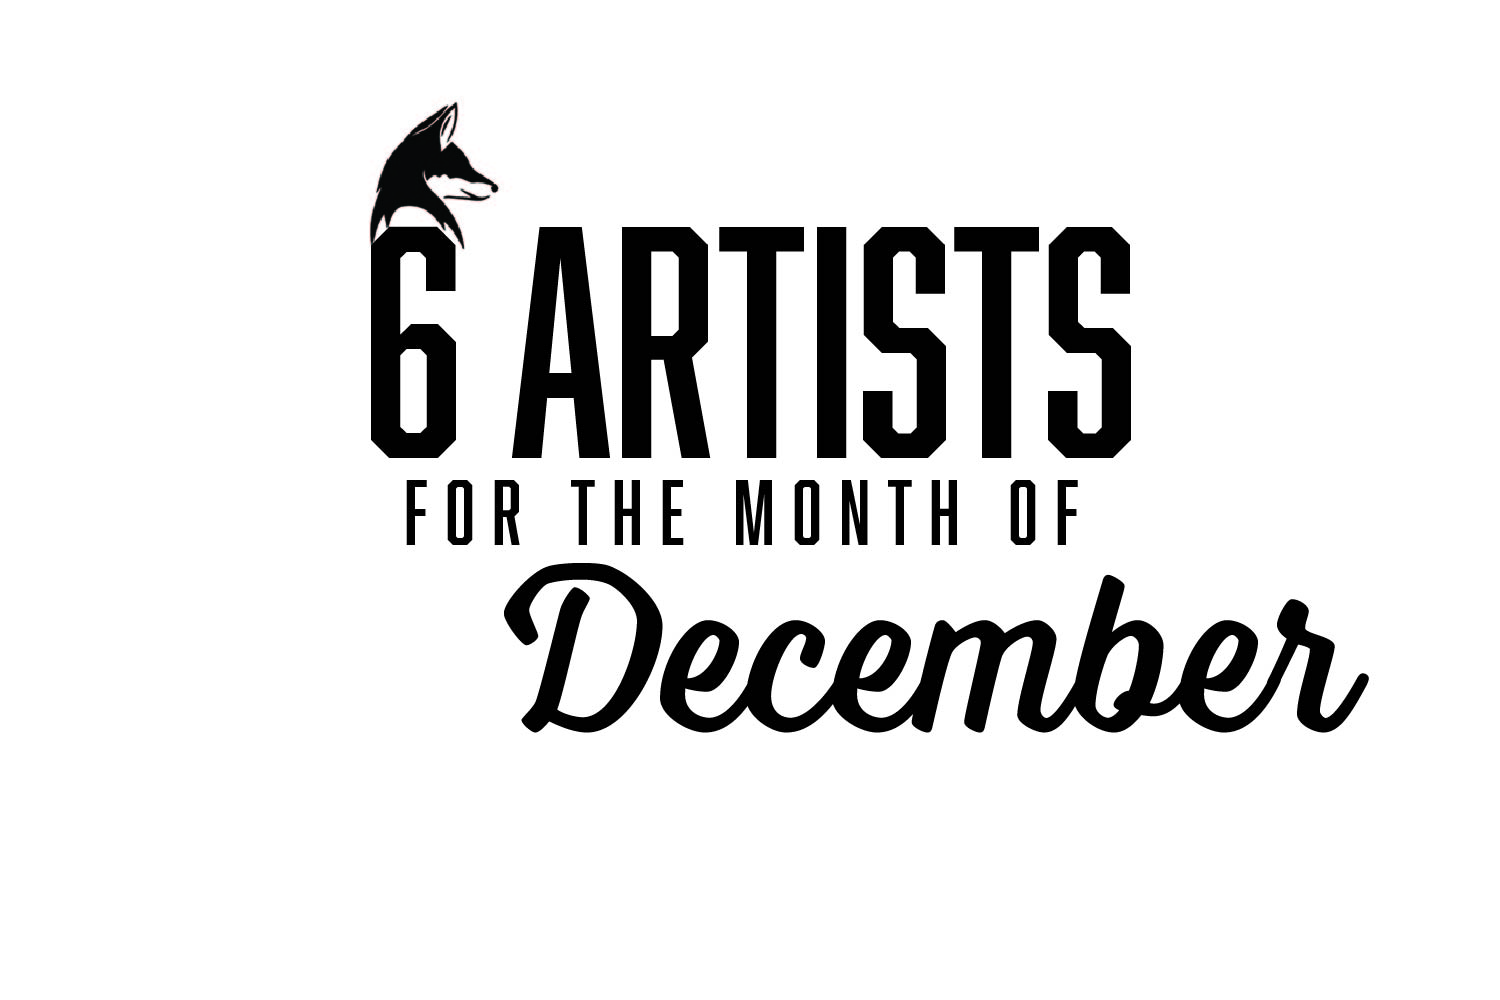 Six+Artists+You+Should+Be+Listening+To%3A+December+2020+EDITION